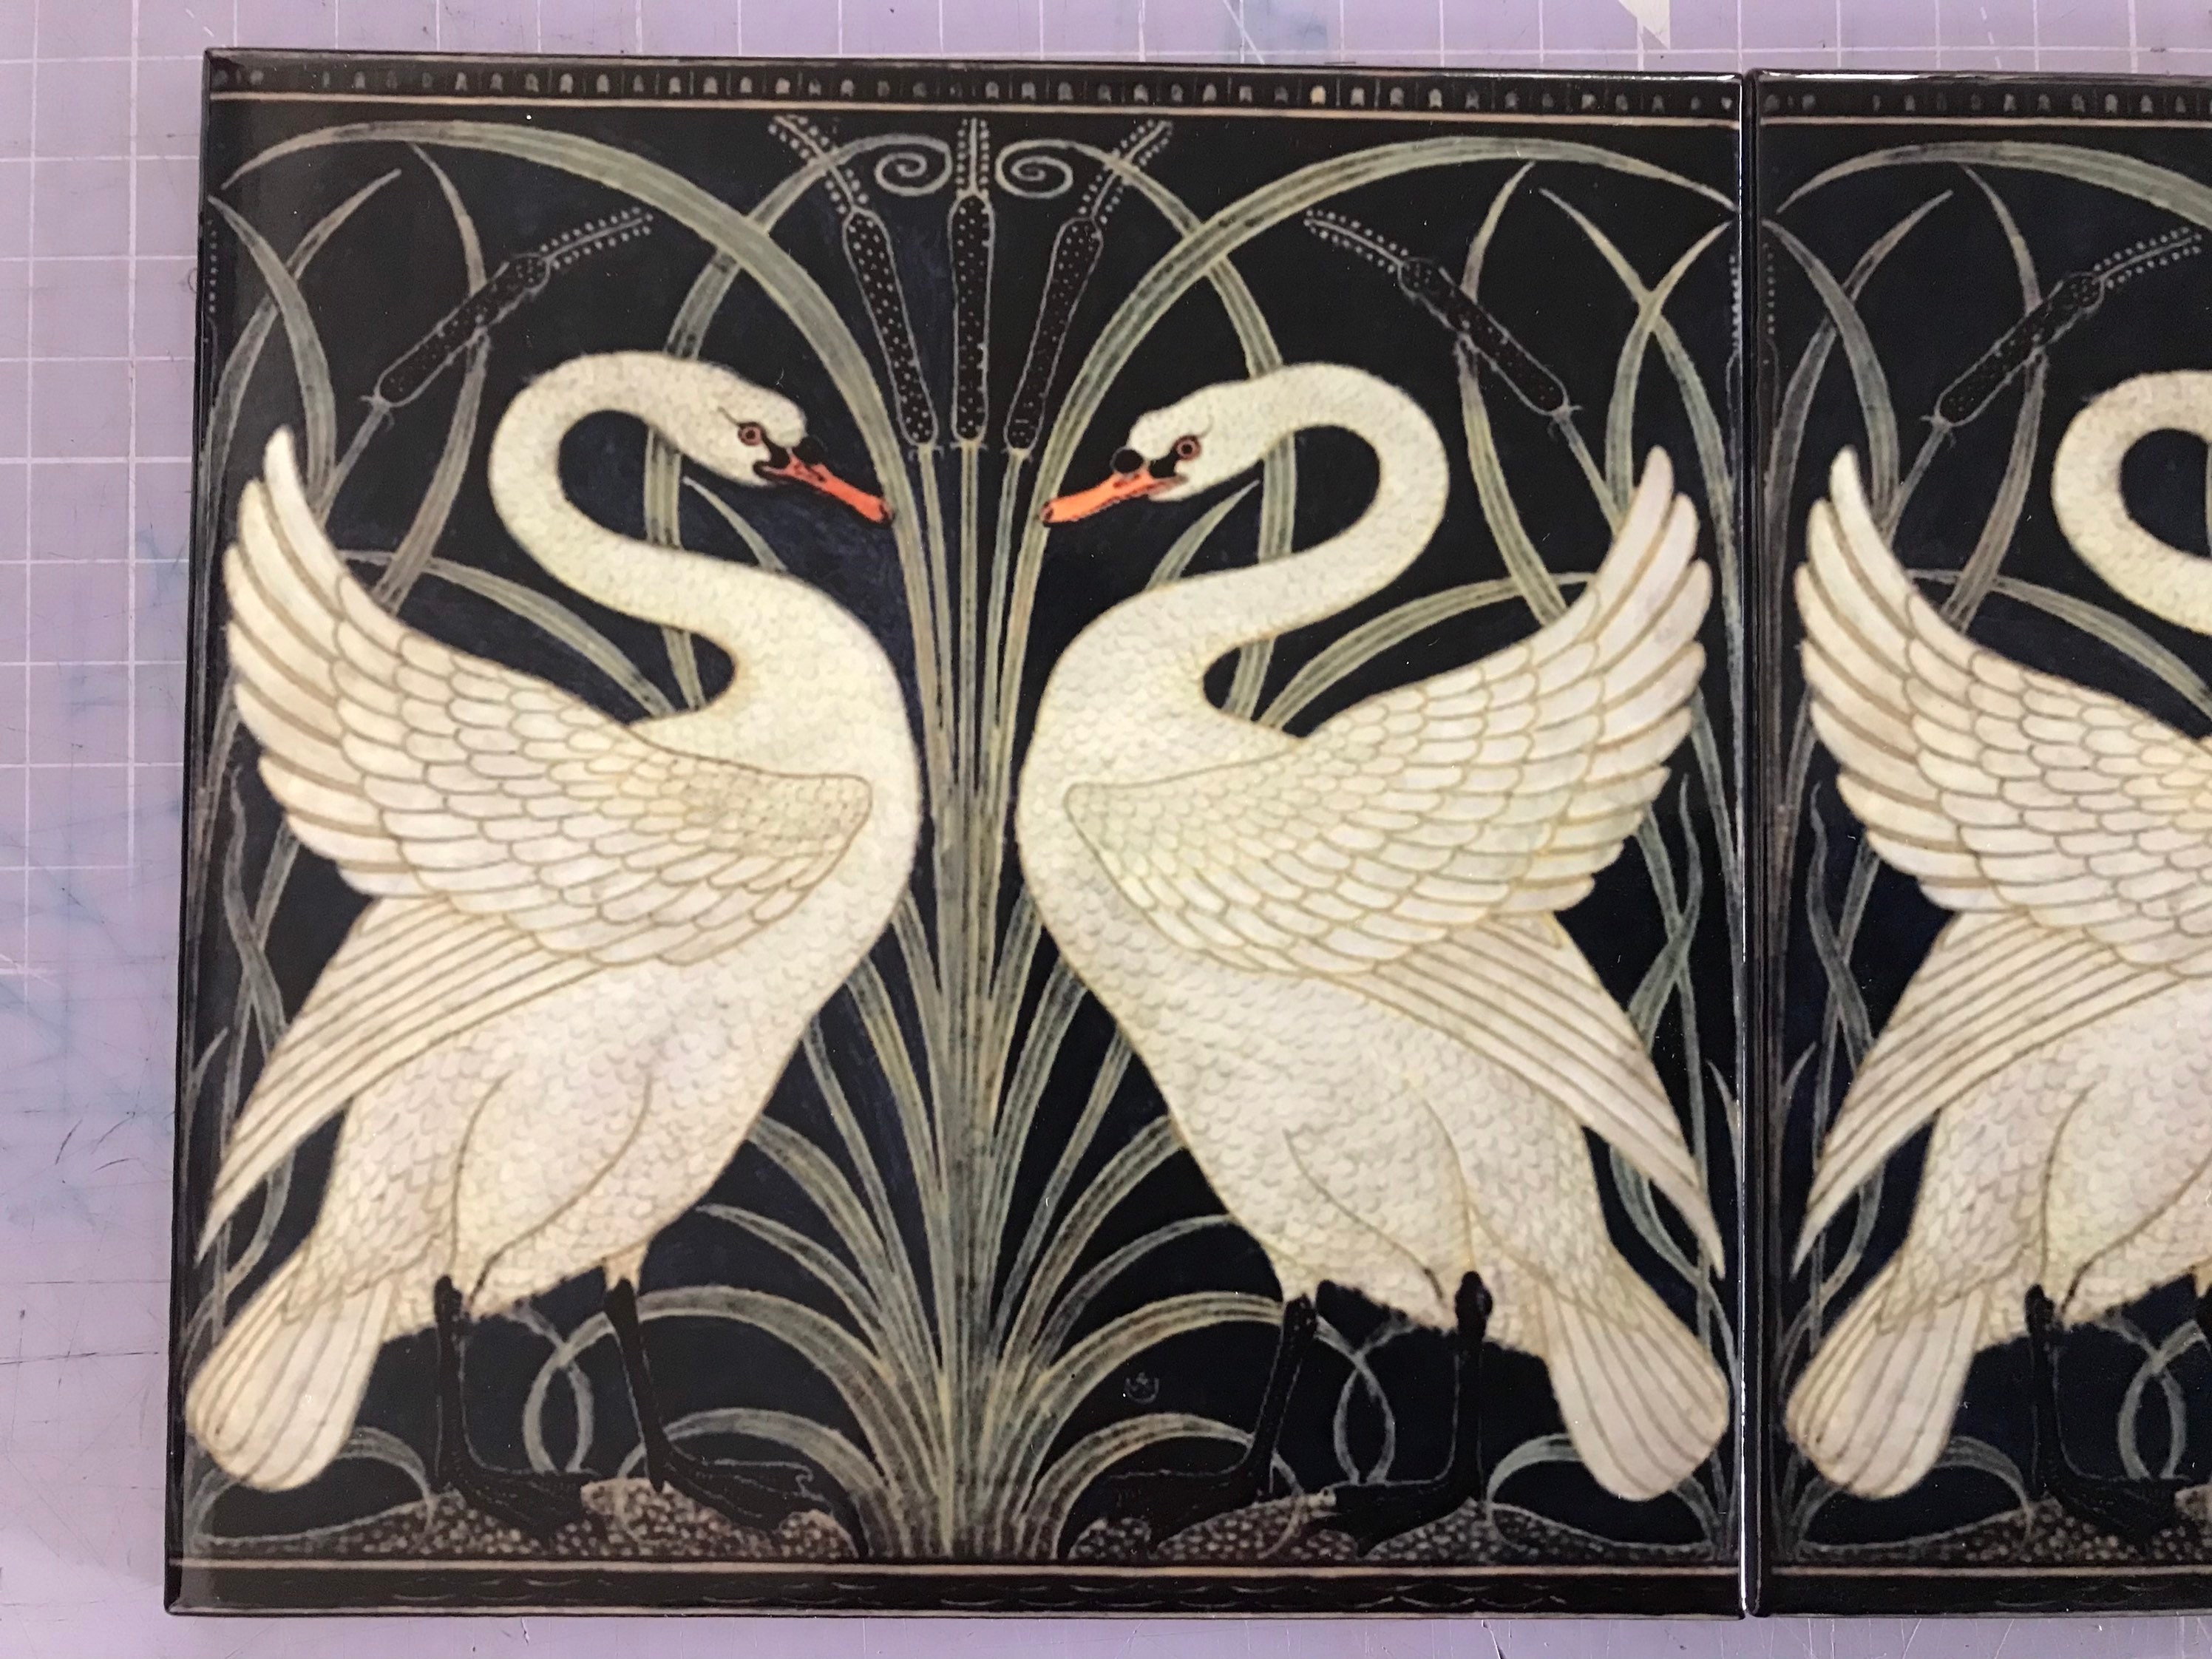 VICTORIAN ANTIQUE VINTAGE SWAN WITH CYGNETS POTTERY CERAMIC TILE C.1900 LOT A 